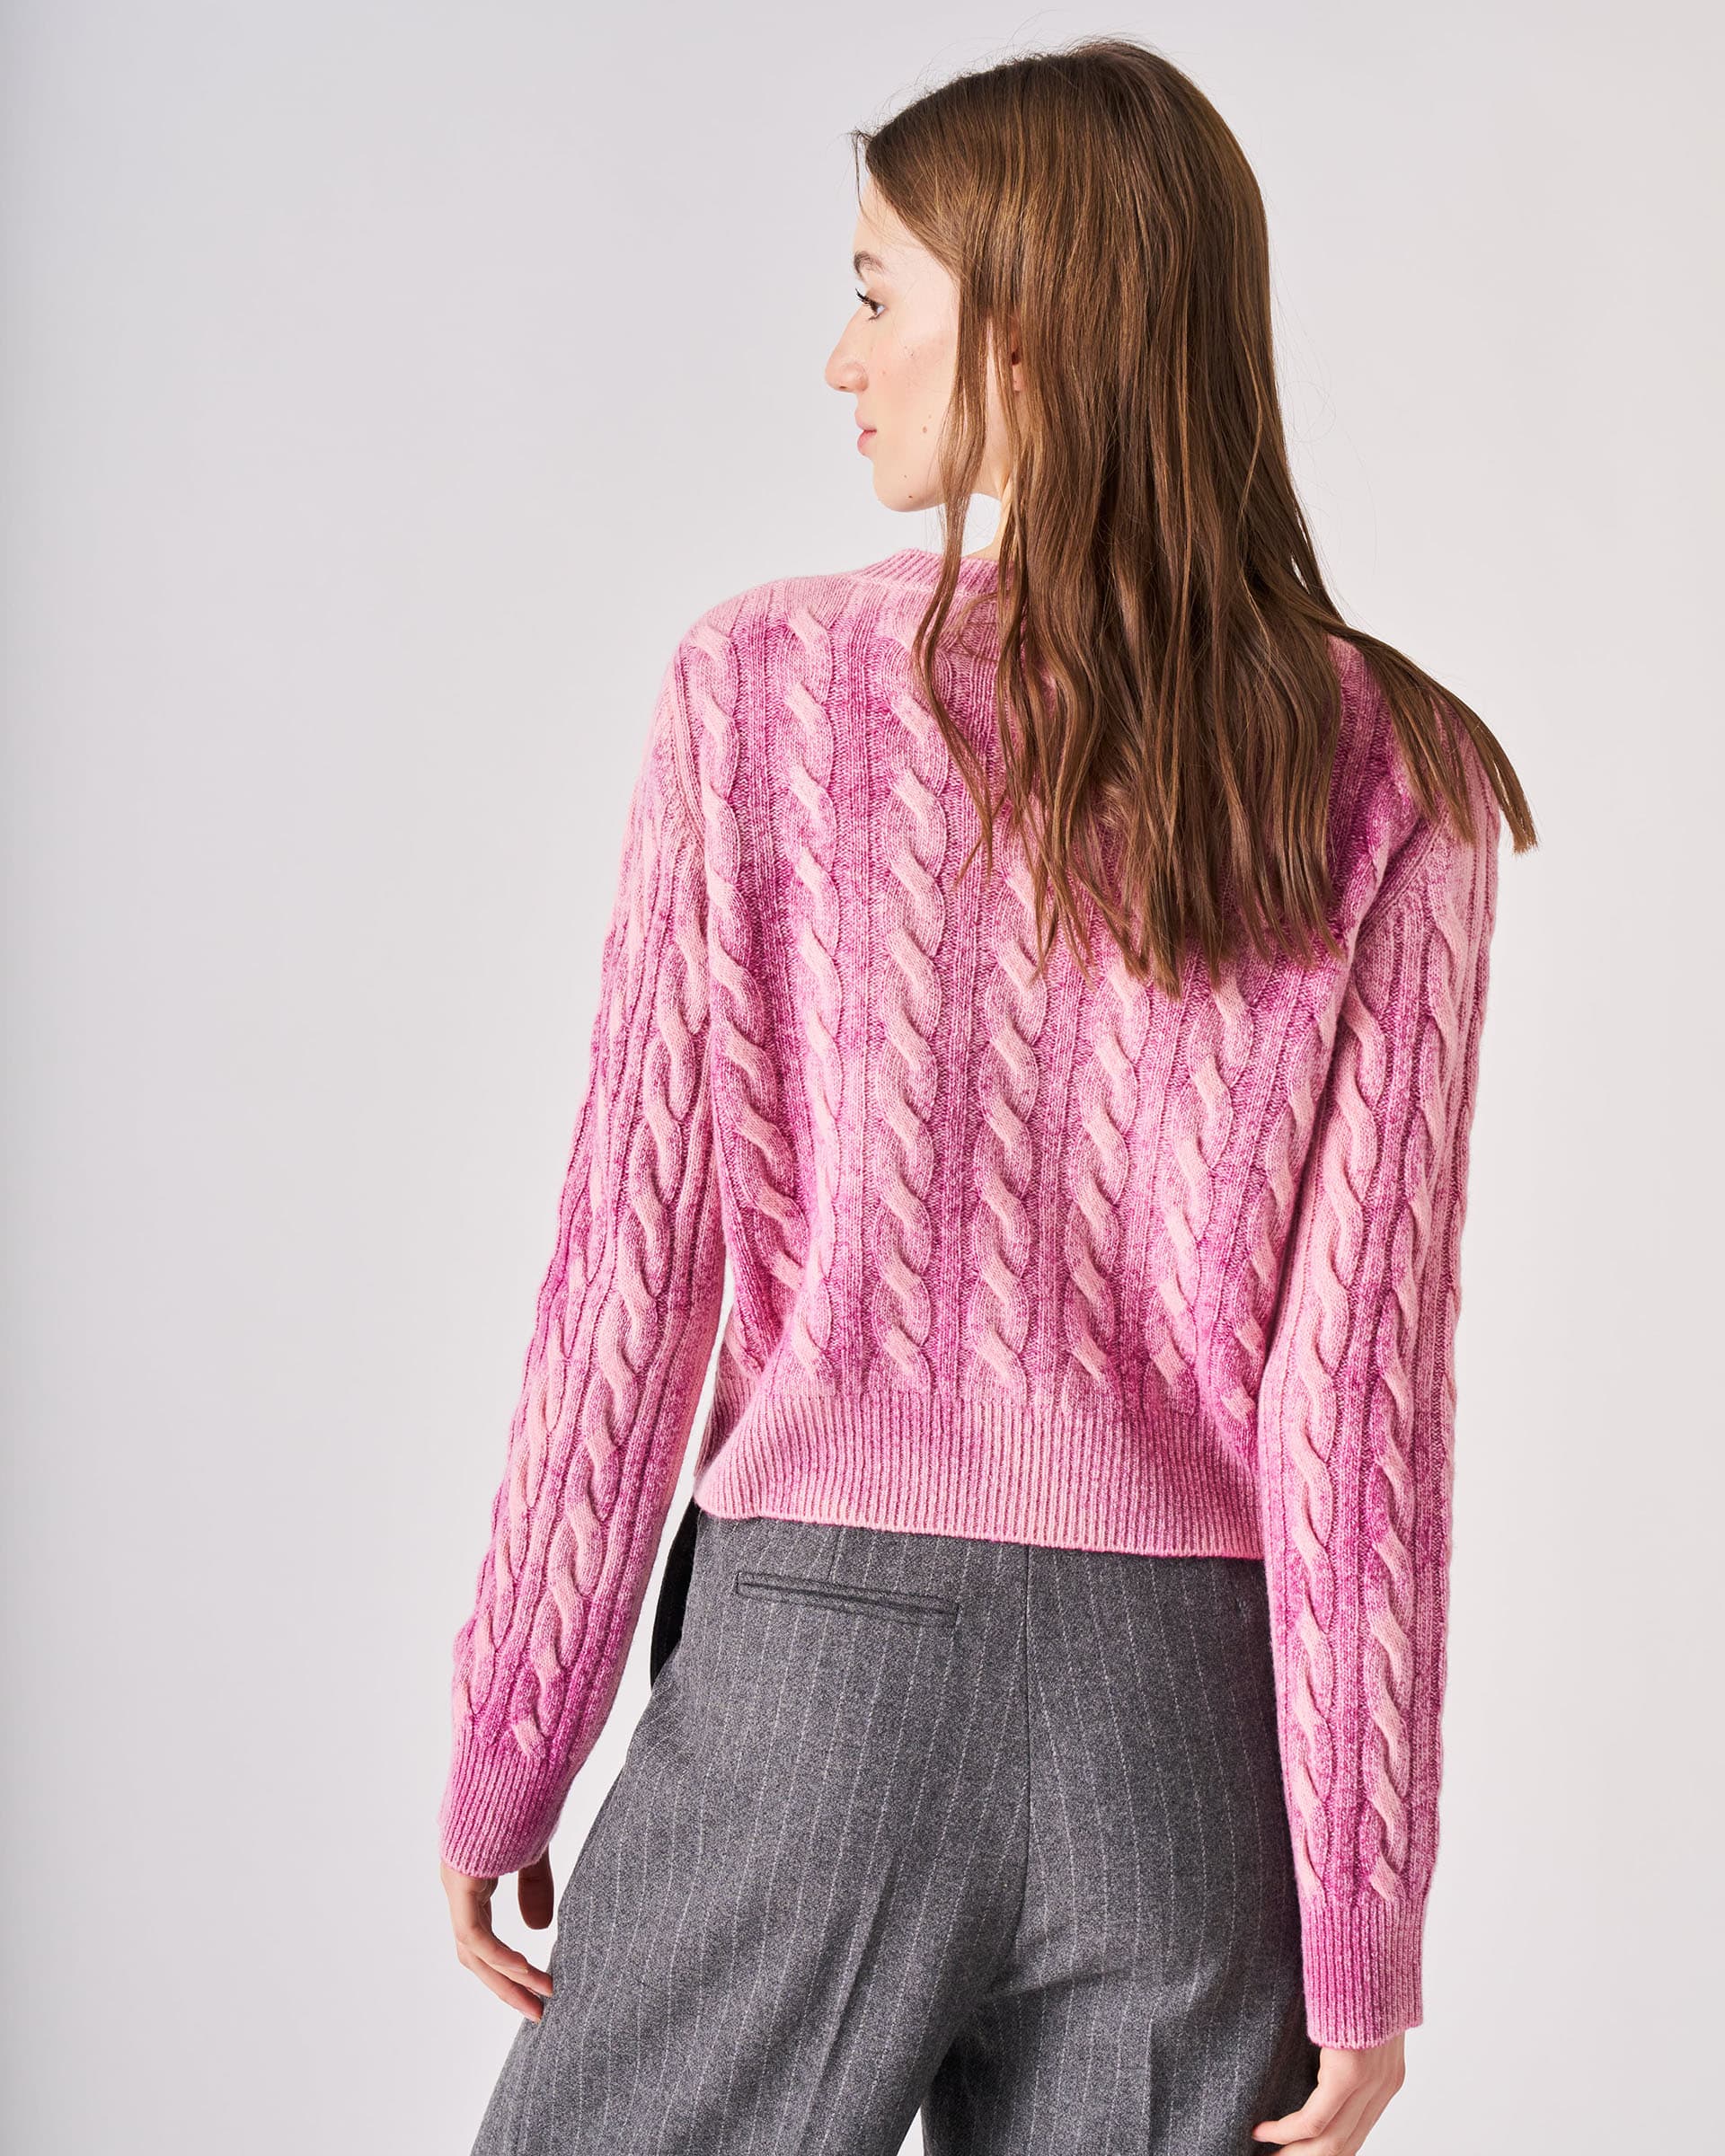 The Market Store | Crew Neck Sweater With Braids